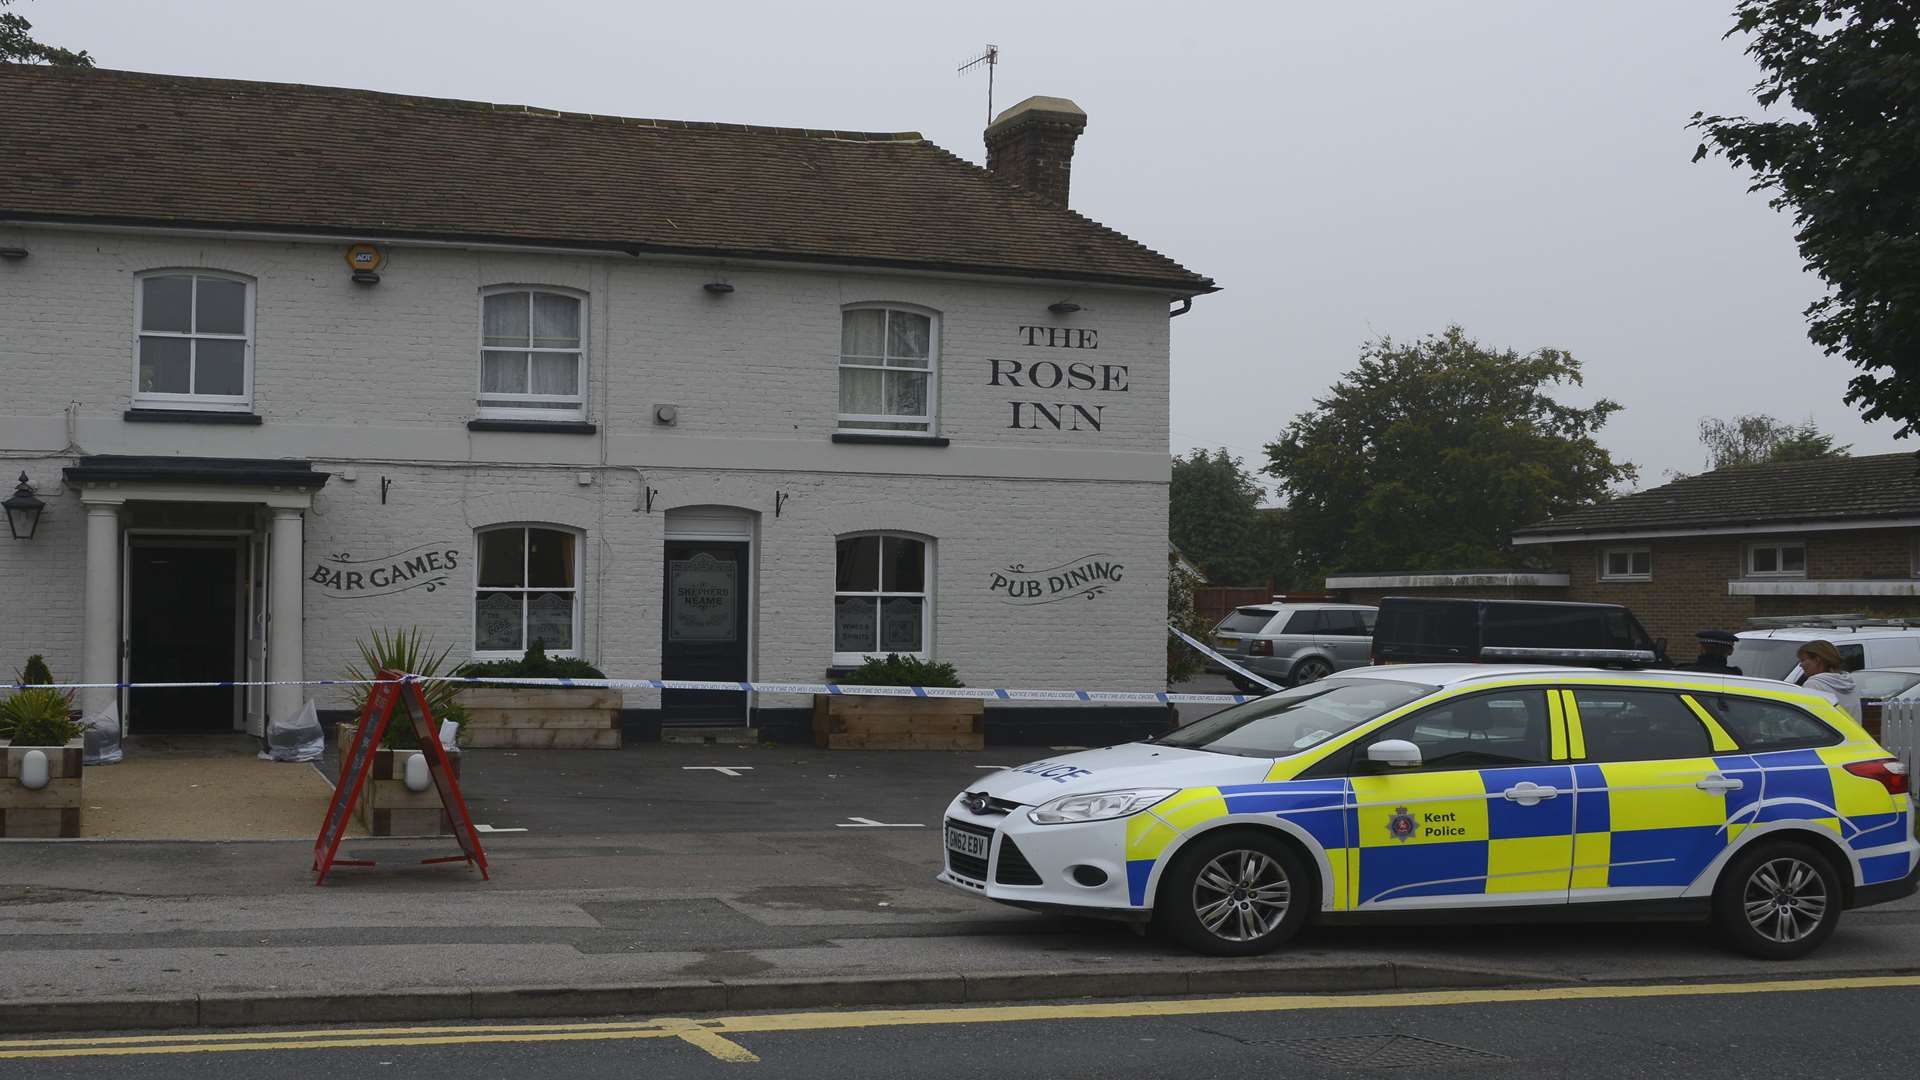 The Rose Inn was cordoned off after the incident